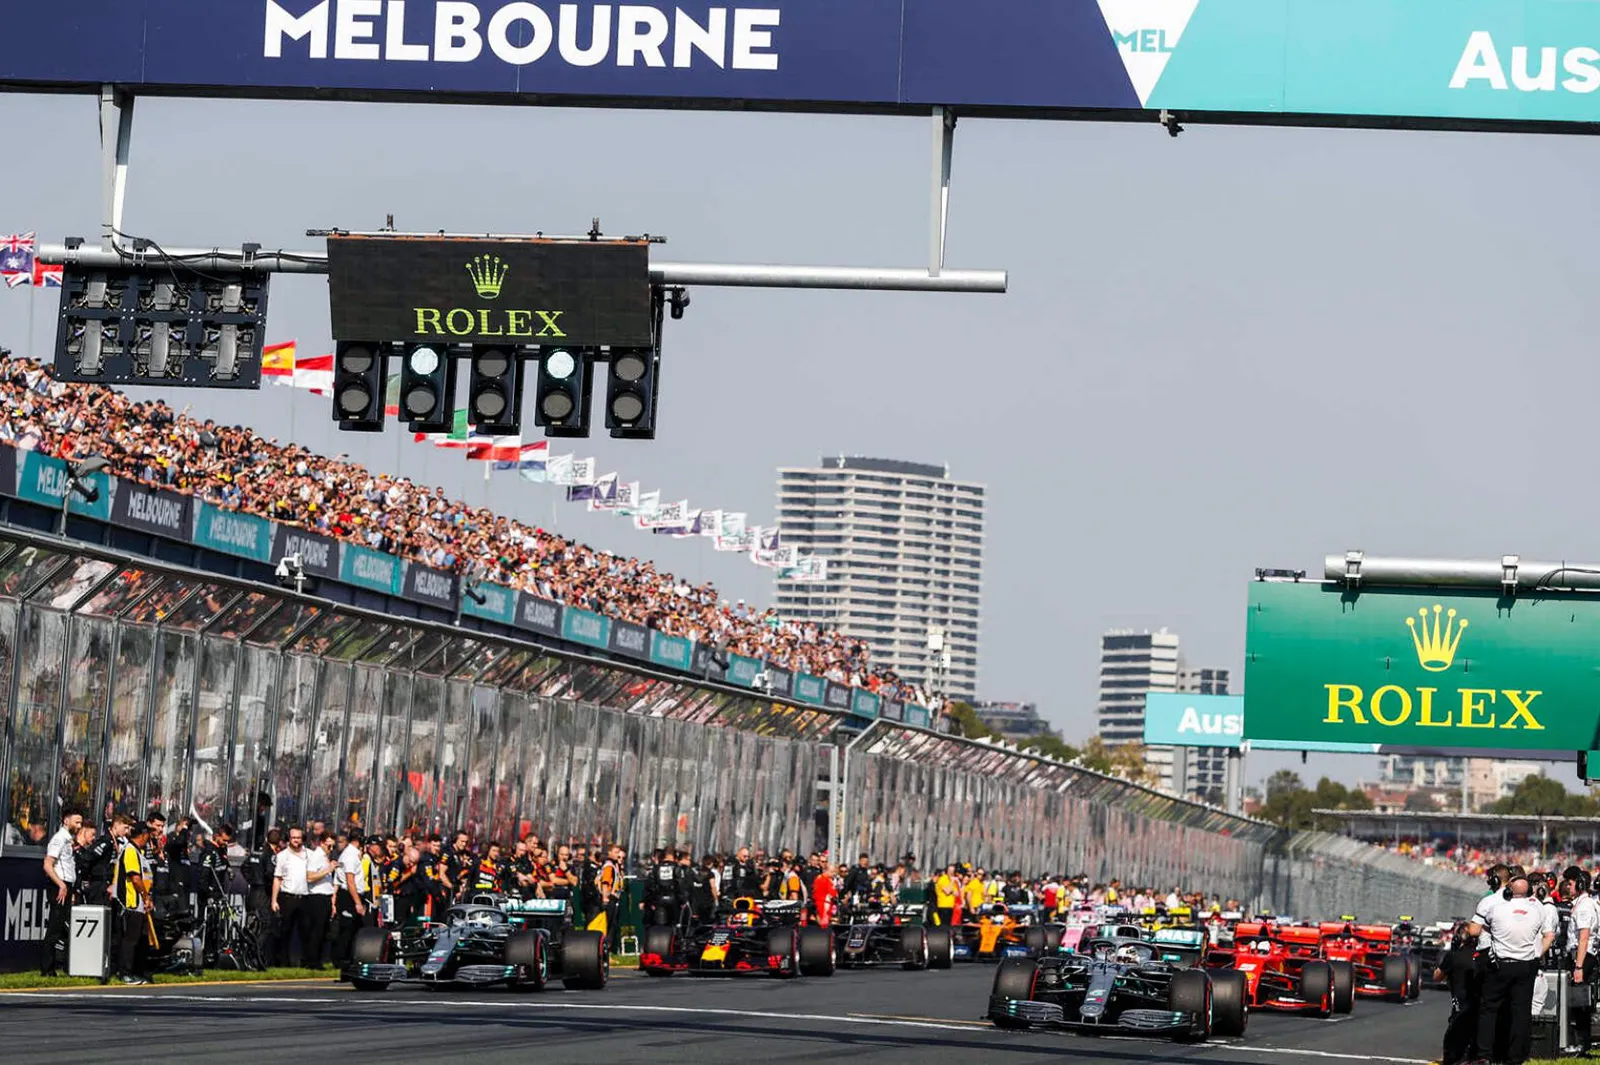 enjoy the start finish and best views of the race from the f1 paddock club or champions club